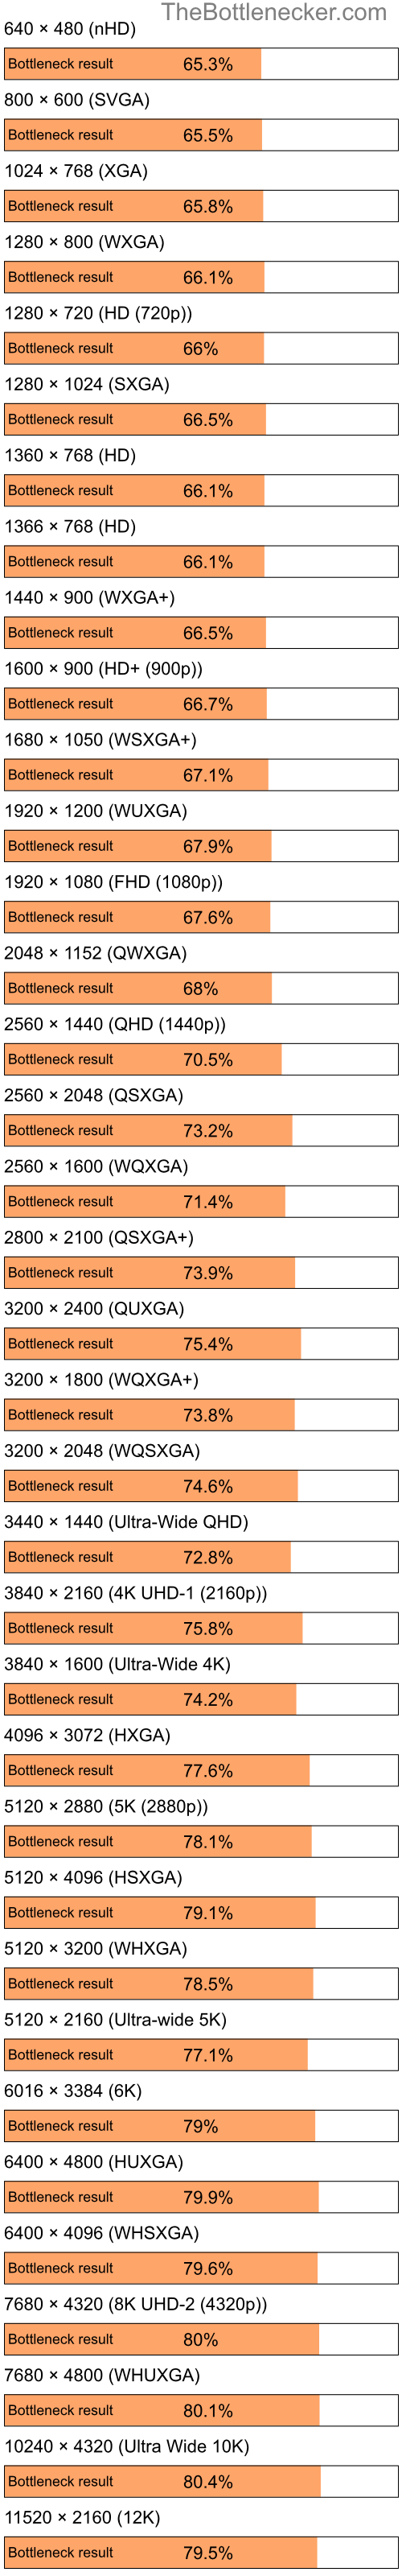 Bottleneck results by resolution for Intel Pentium 4 and NVIDIA GeForce GT 320M in Graphic Card Intense Tasks